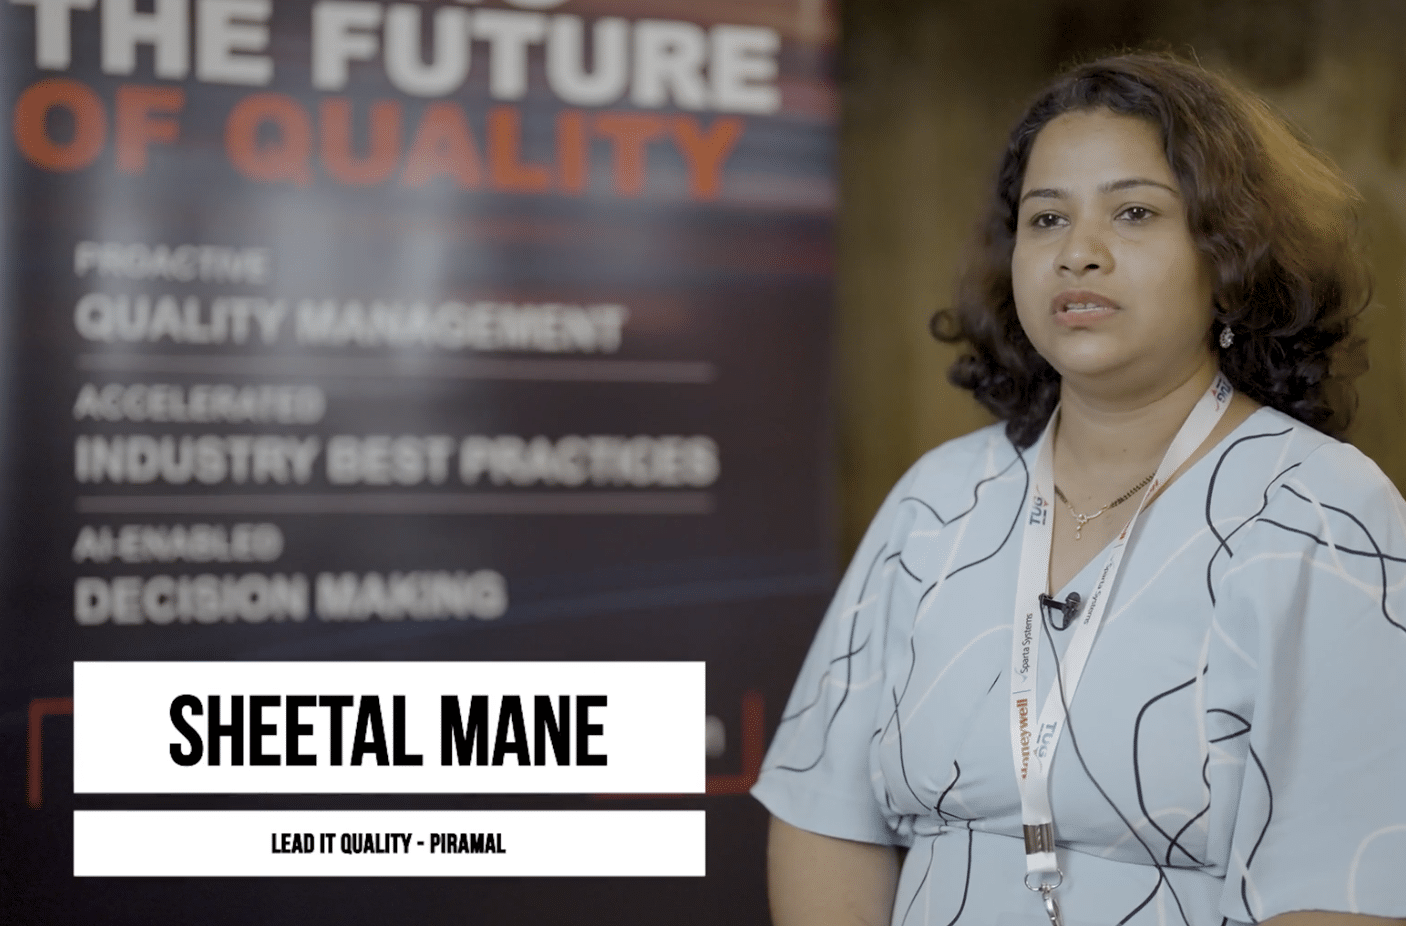 Hear from Sheetal Mane, Lead IT Quality at Piramal, as she discusses their journey with TrackWise, transforming operations across 16 sites. Explore their transition from paper-based to digital processes and thoughts on TrackWise Digital for enhanced efficiency.